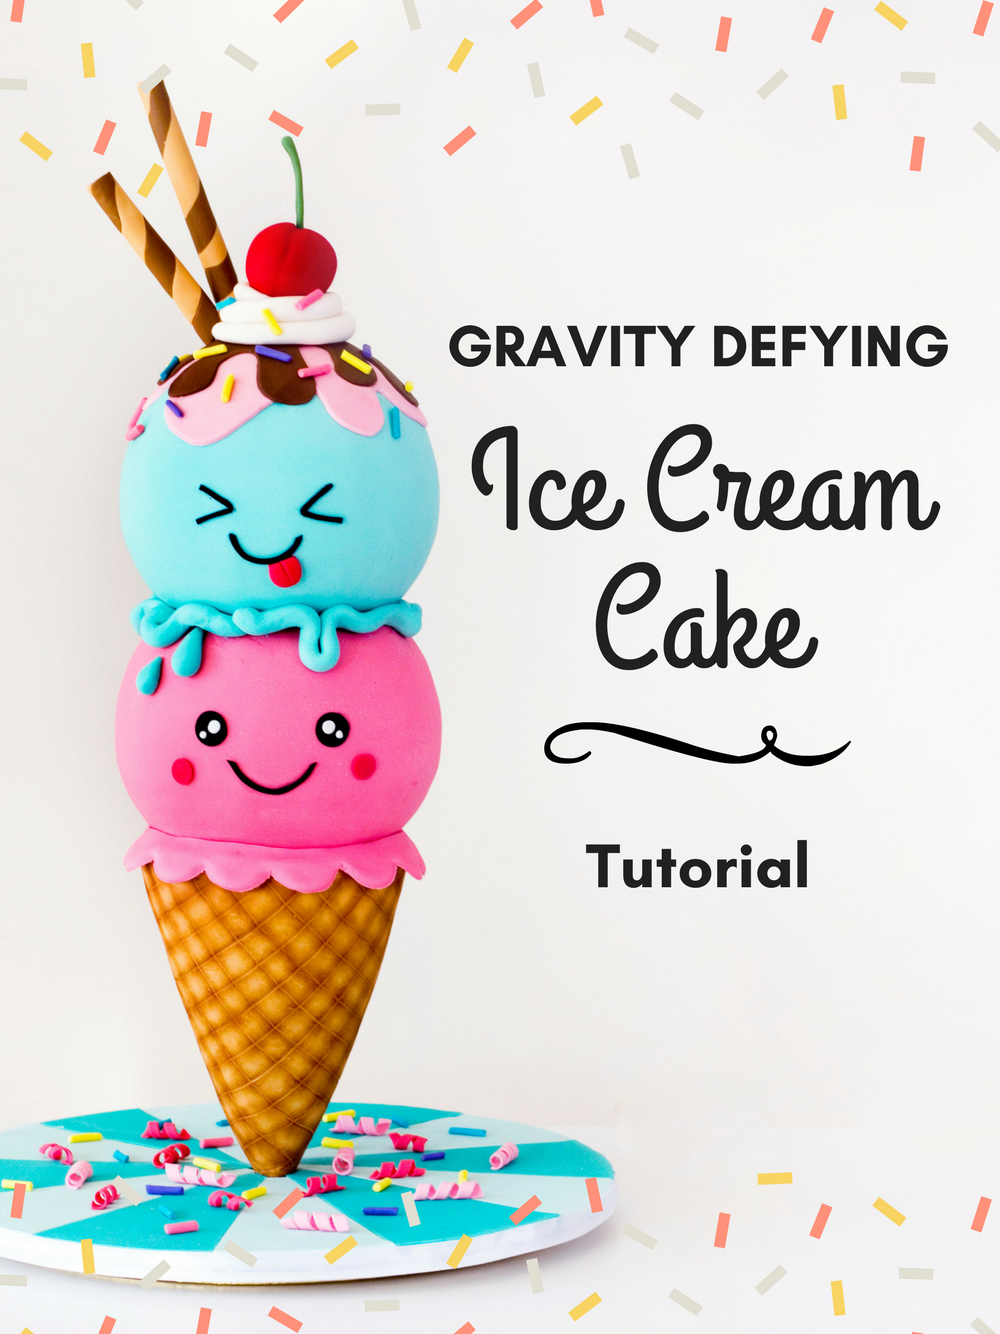 ice cream and cake games download the new version for ipod